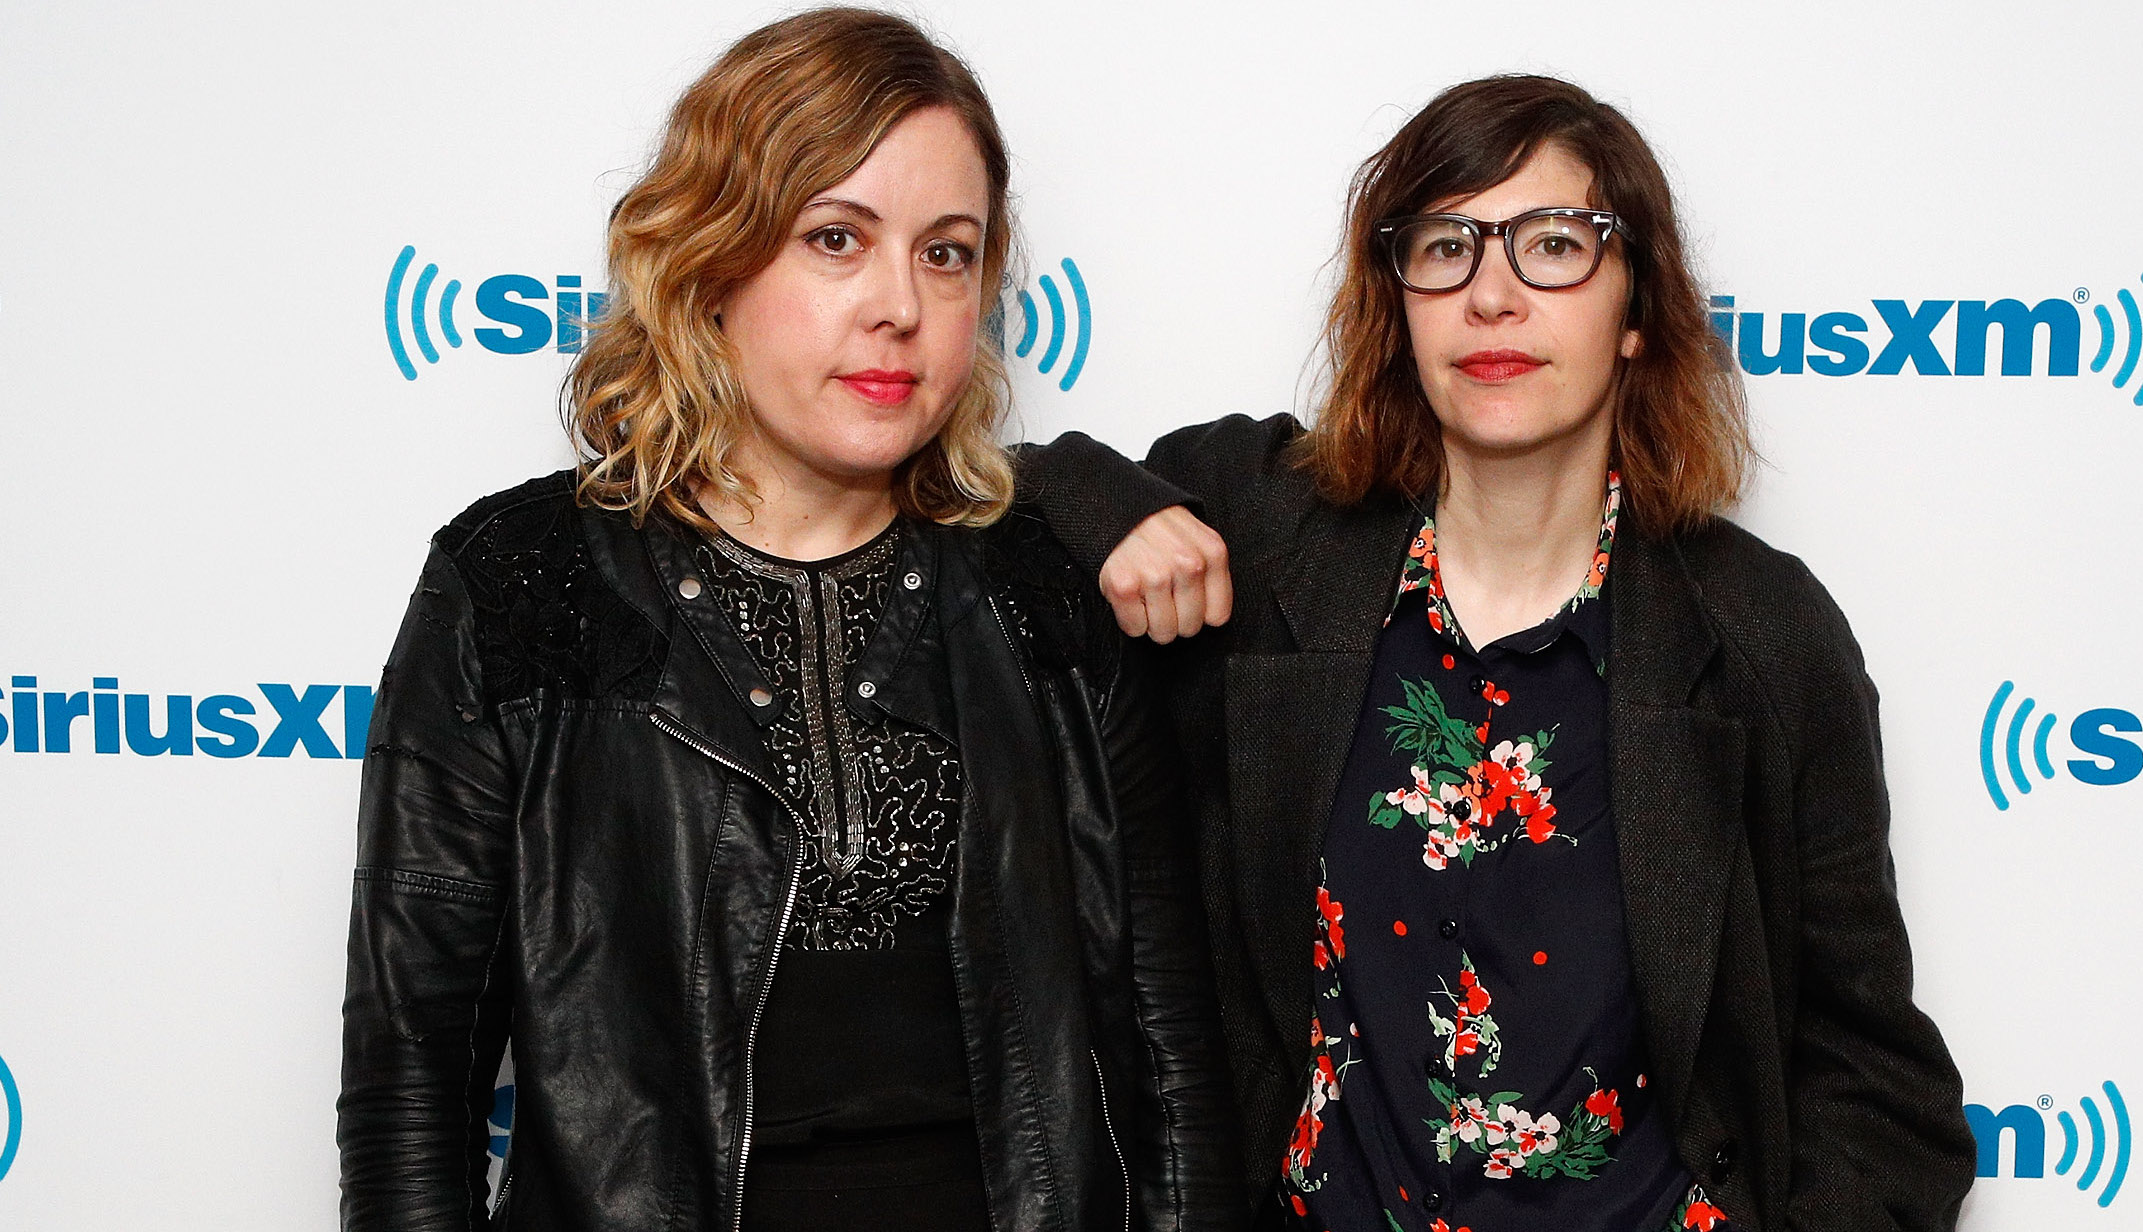 Sleater-Kinney's Corin Tucker and Carrie Brownstein (photo: Astrid Stawiarz / Getty Images)